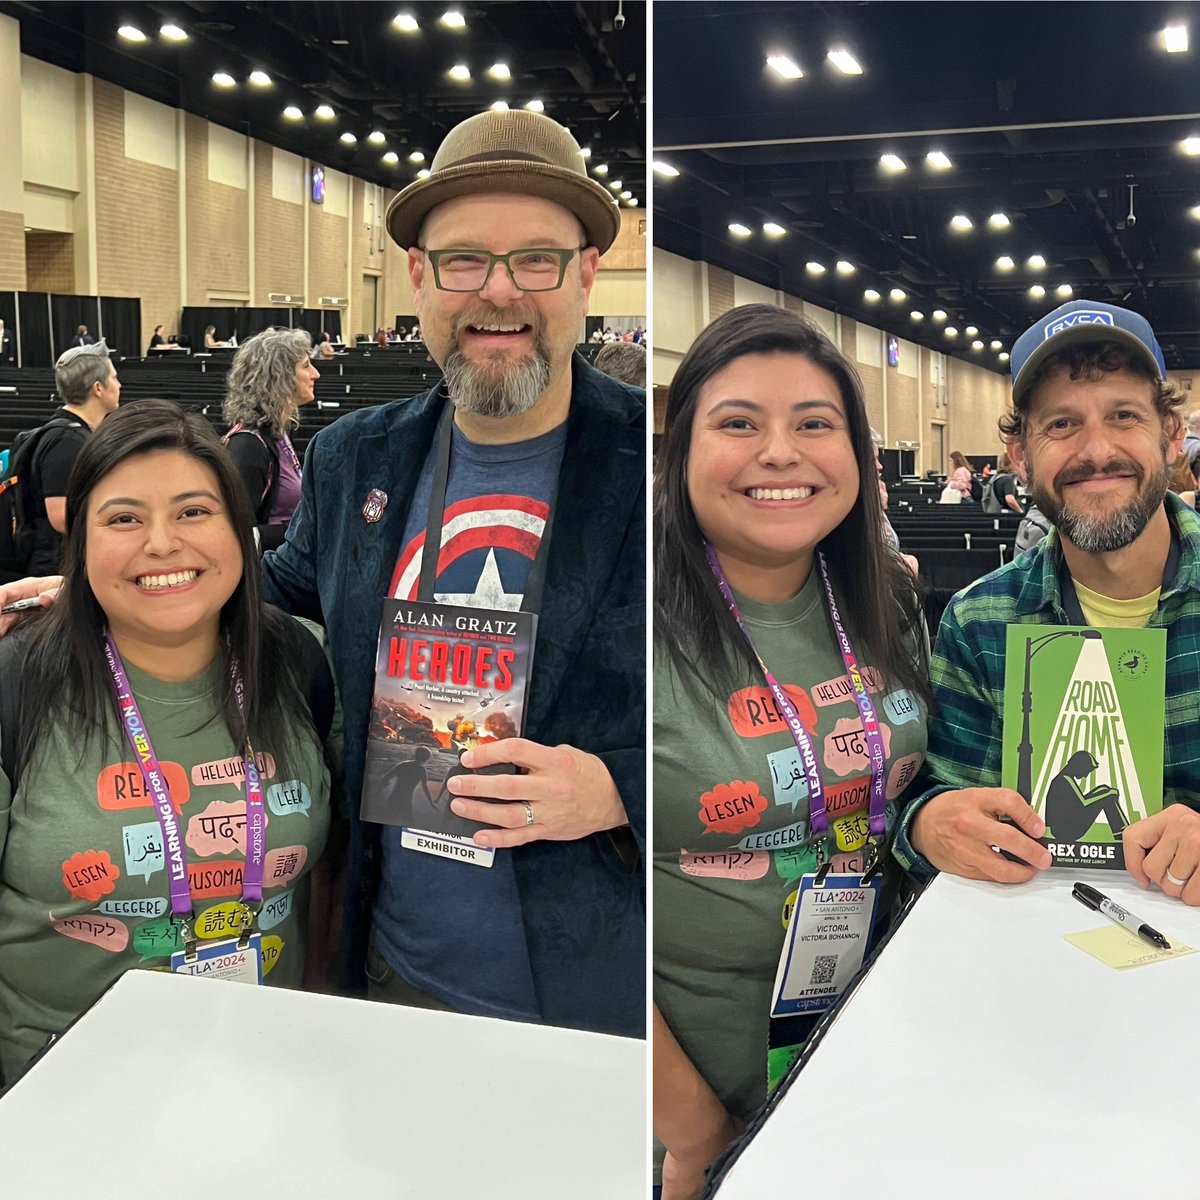 Had an incredible 2nd day at #txla24 meeting so many inspiring authors like Alan Gratz and Rex Ogle! Feeling super motivated and full of new ideas! 📚✨ #booklove